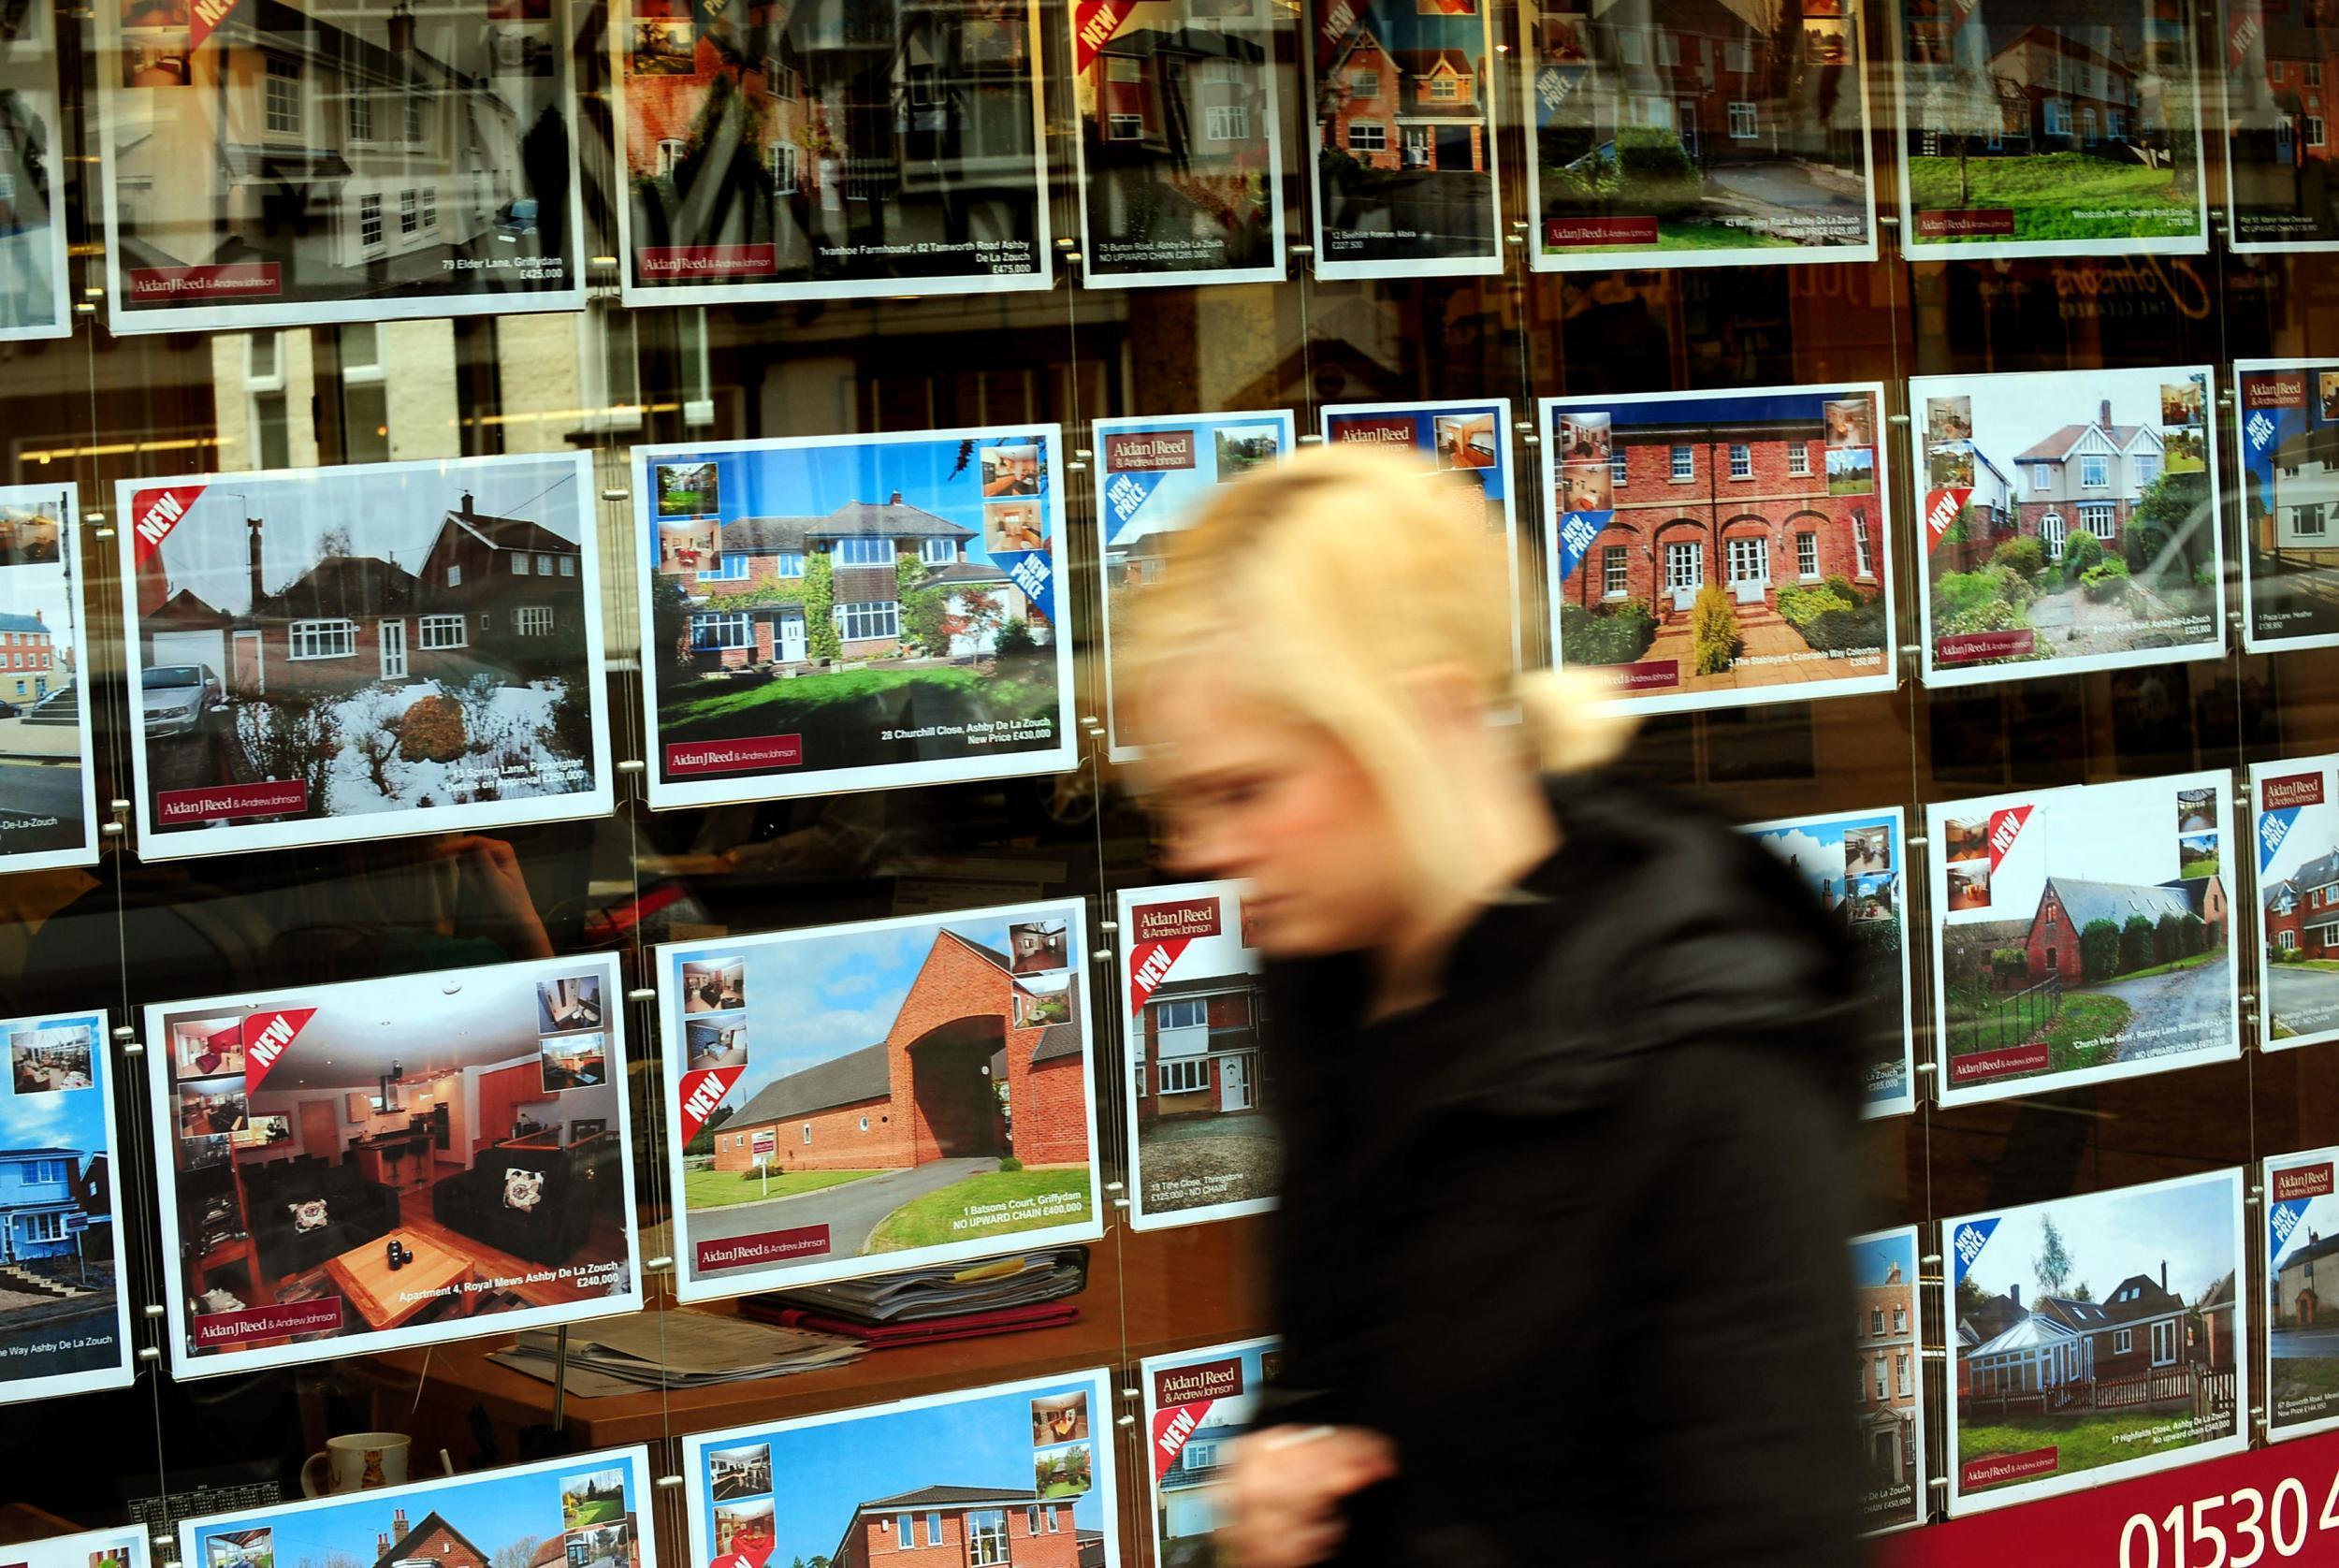 Mortgage approvals were their lowest since last September